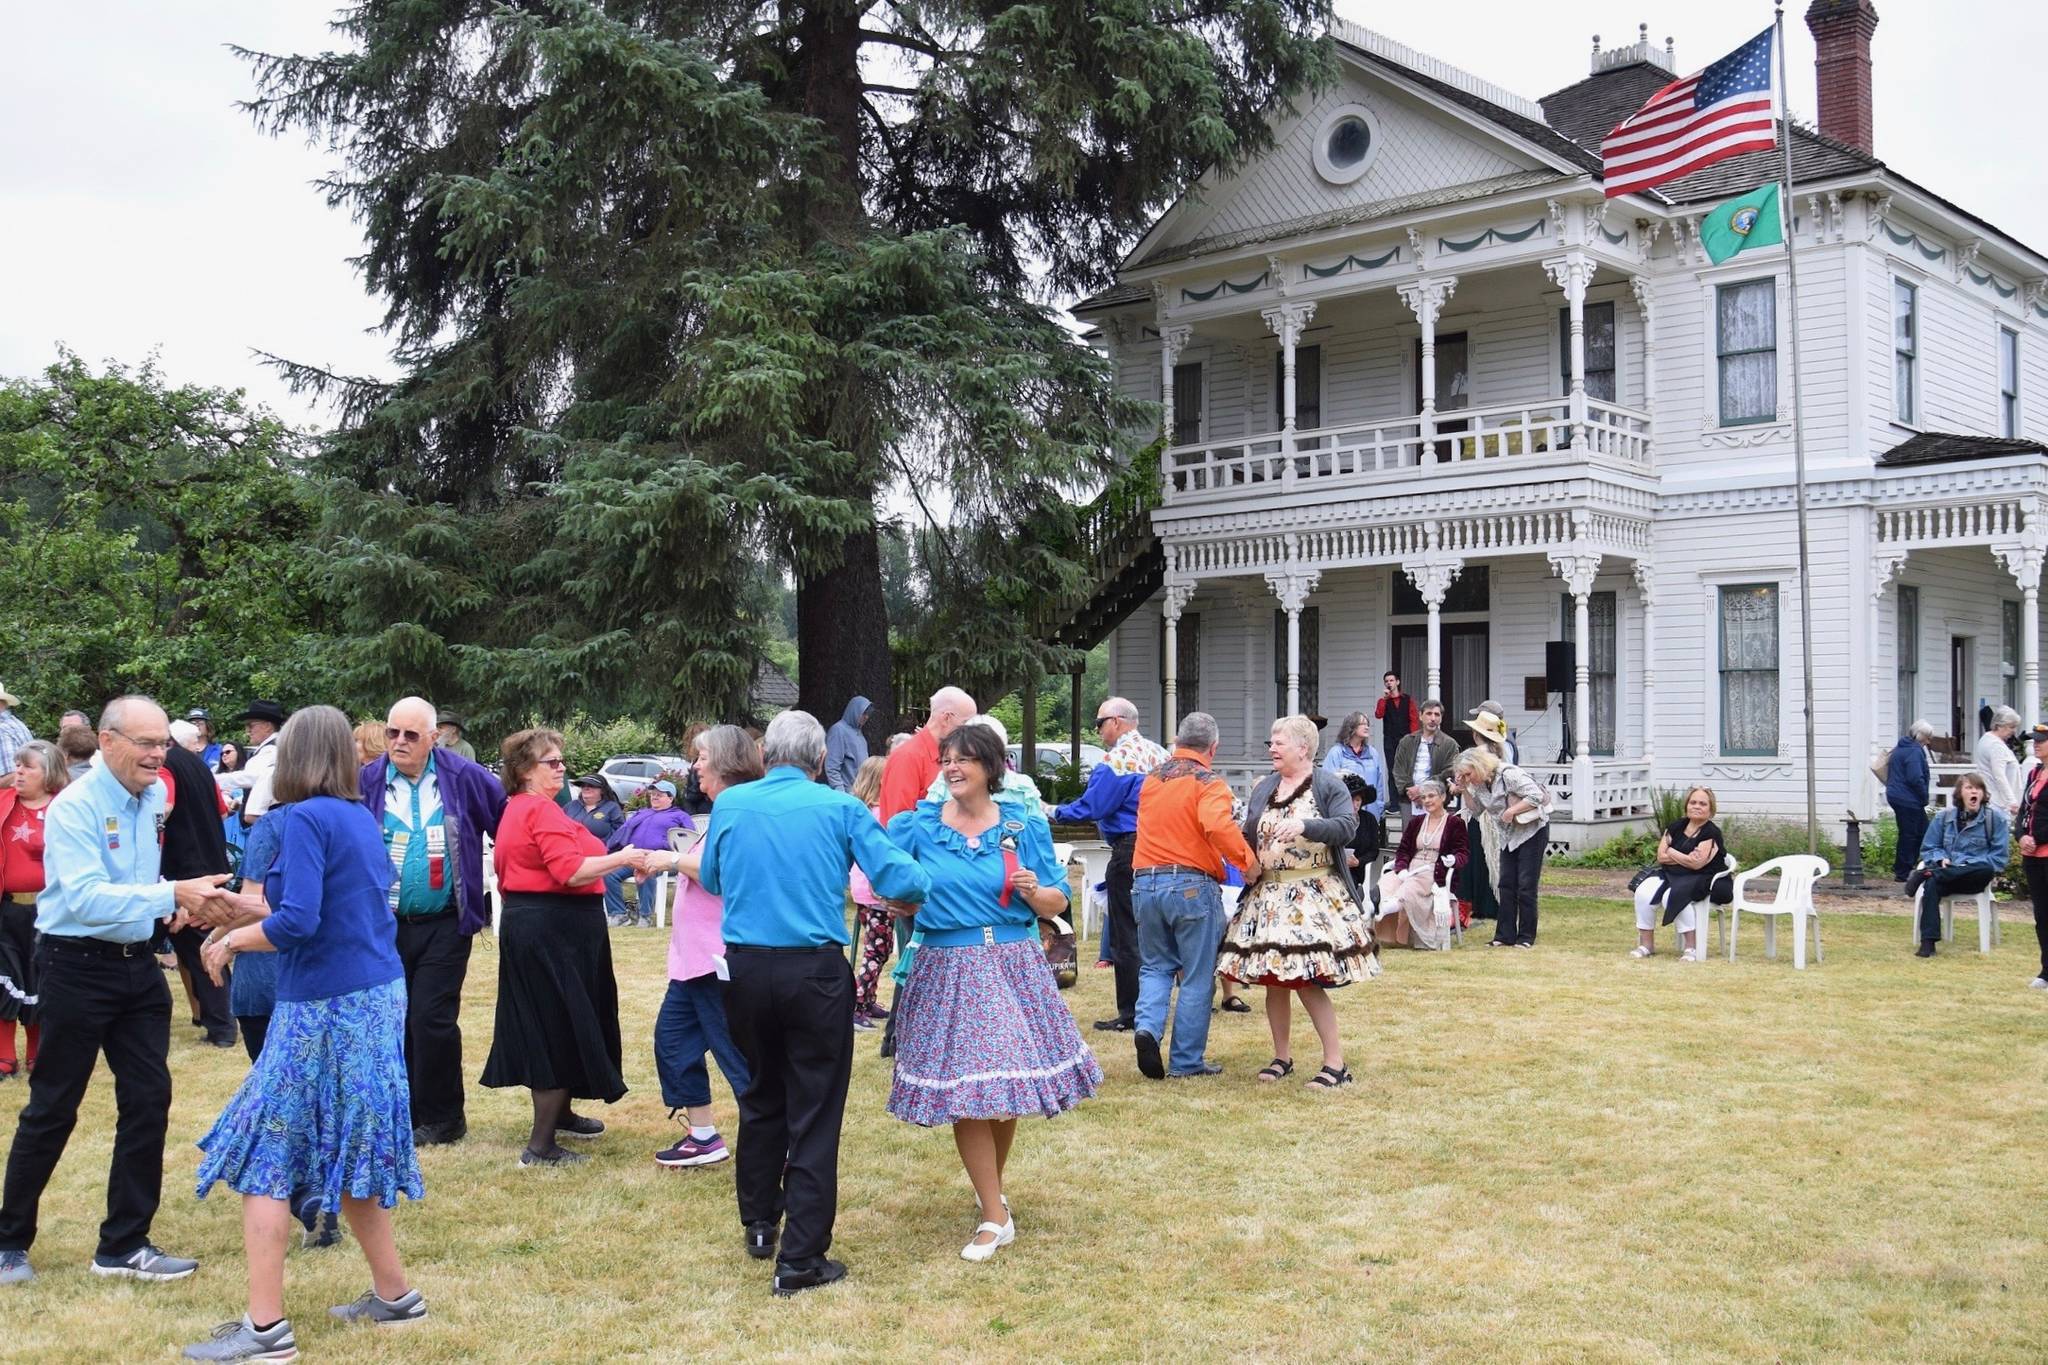 The Washington State Square and Folk Dance Federation performs in front of the Neely Mansion during a community celebration – the 125th anniversary of the historic home Saturday. RACHEL CIAMPI, Auburn Reporter